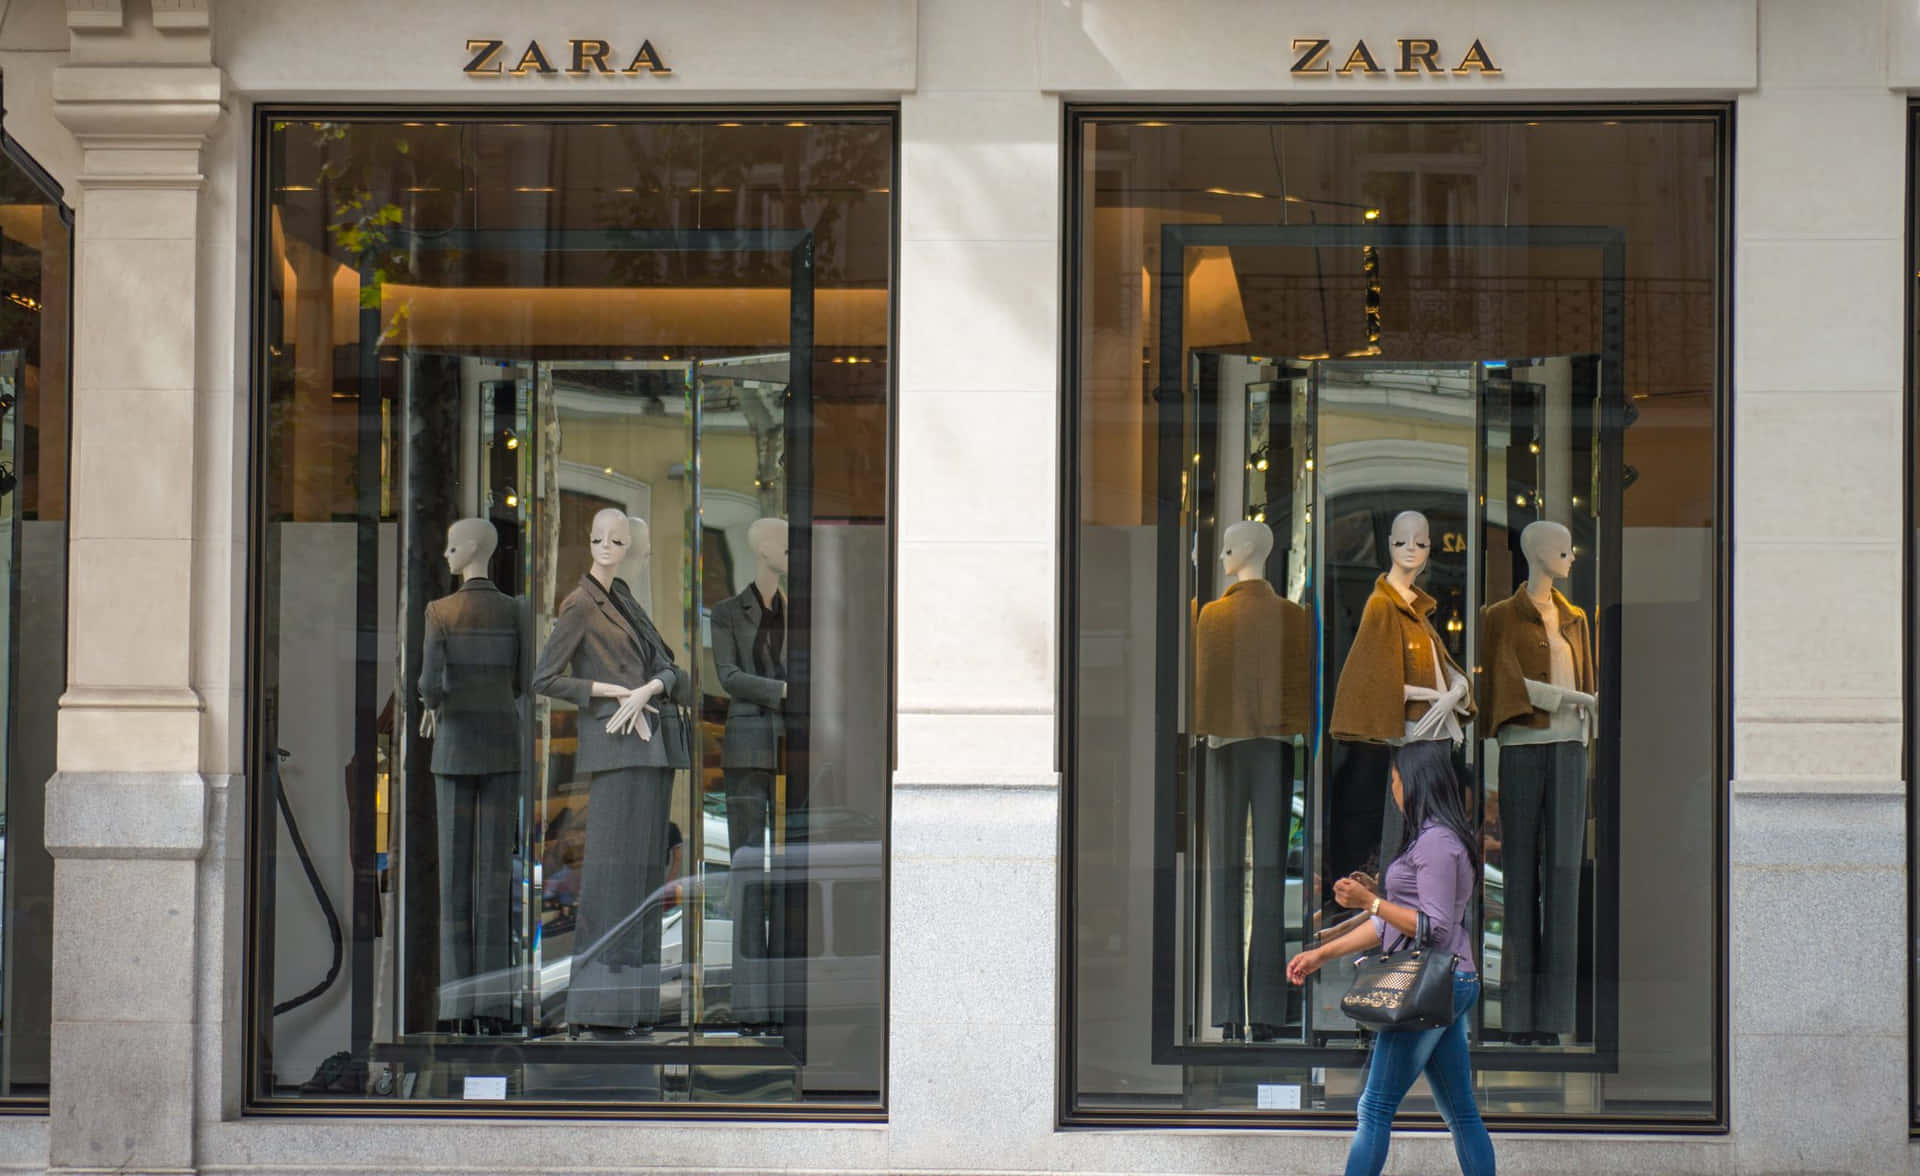 "The latest fashion trends from Zara"